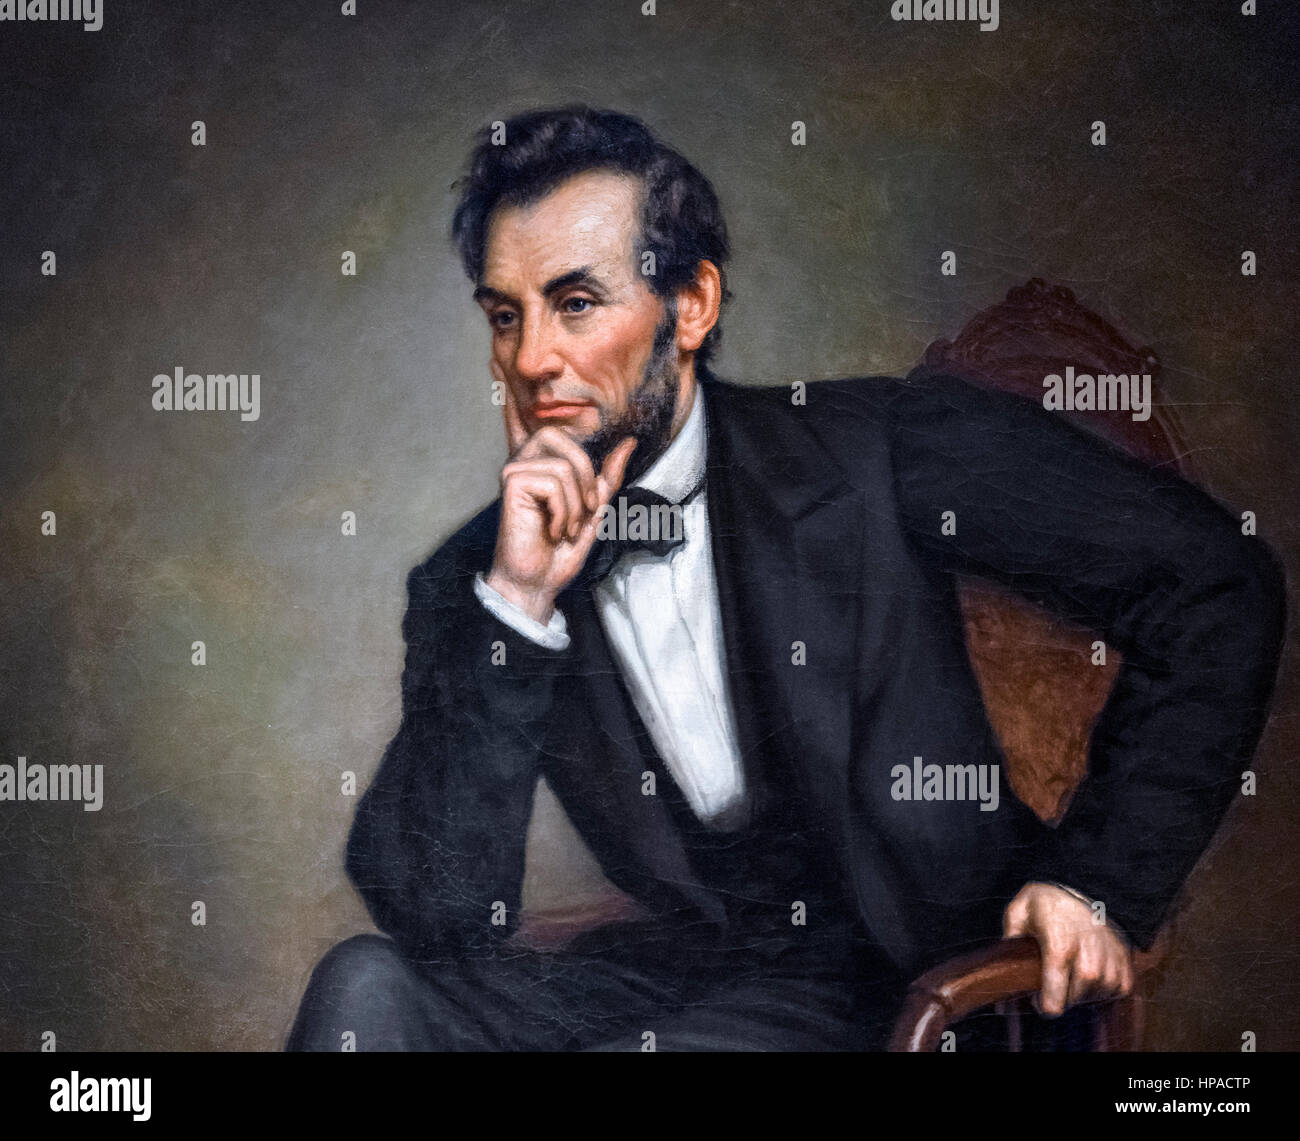 Abraham Lincoln, portrait by George Peter Alexander Healy, oil on canvas, 1887. Detail from a larger painting, HPACTR. Stock Photo